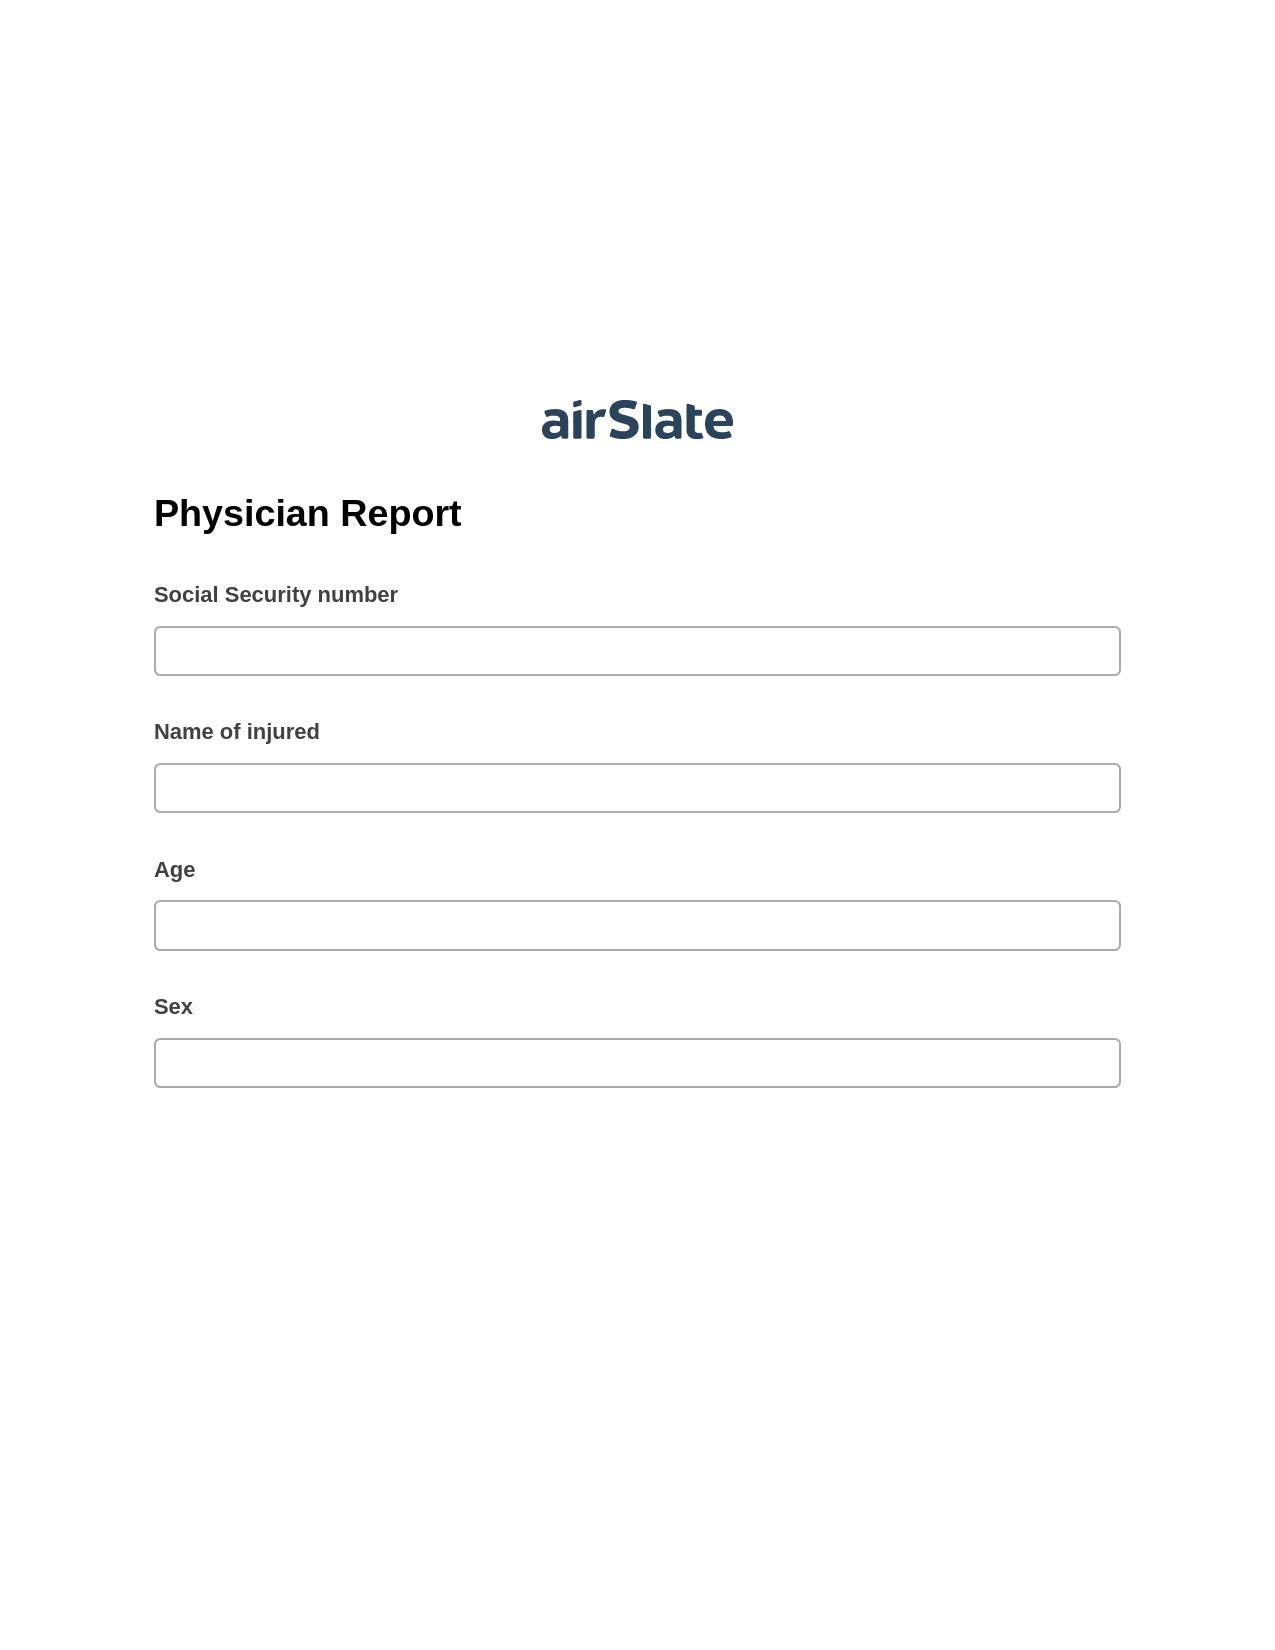 Physician Report Pre-fill from MySQL Bot, Update NetSuite Record Bot, Export to WebMerge Bot